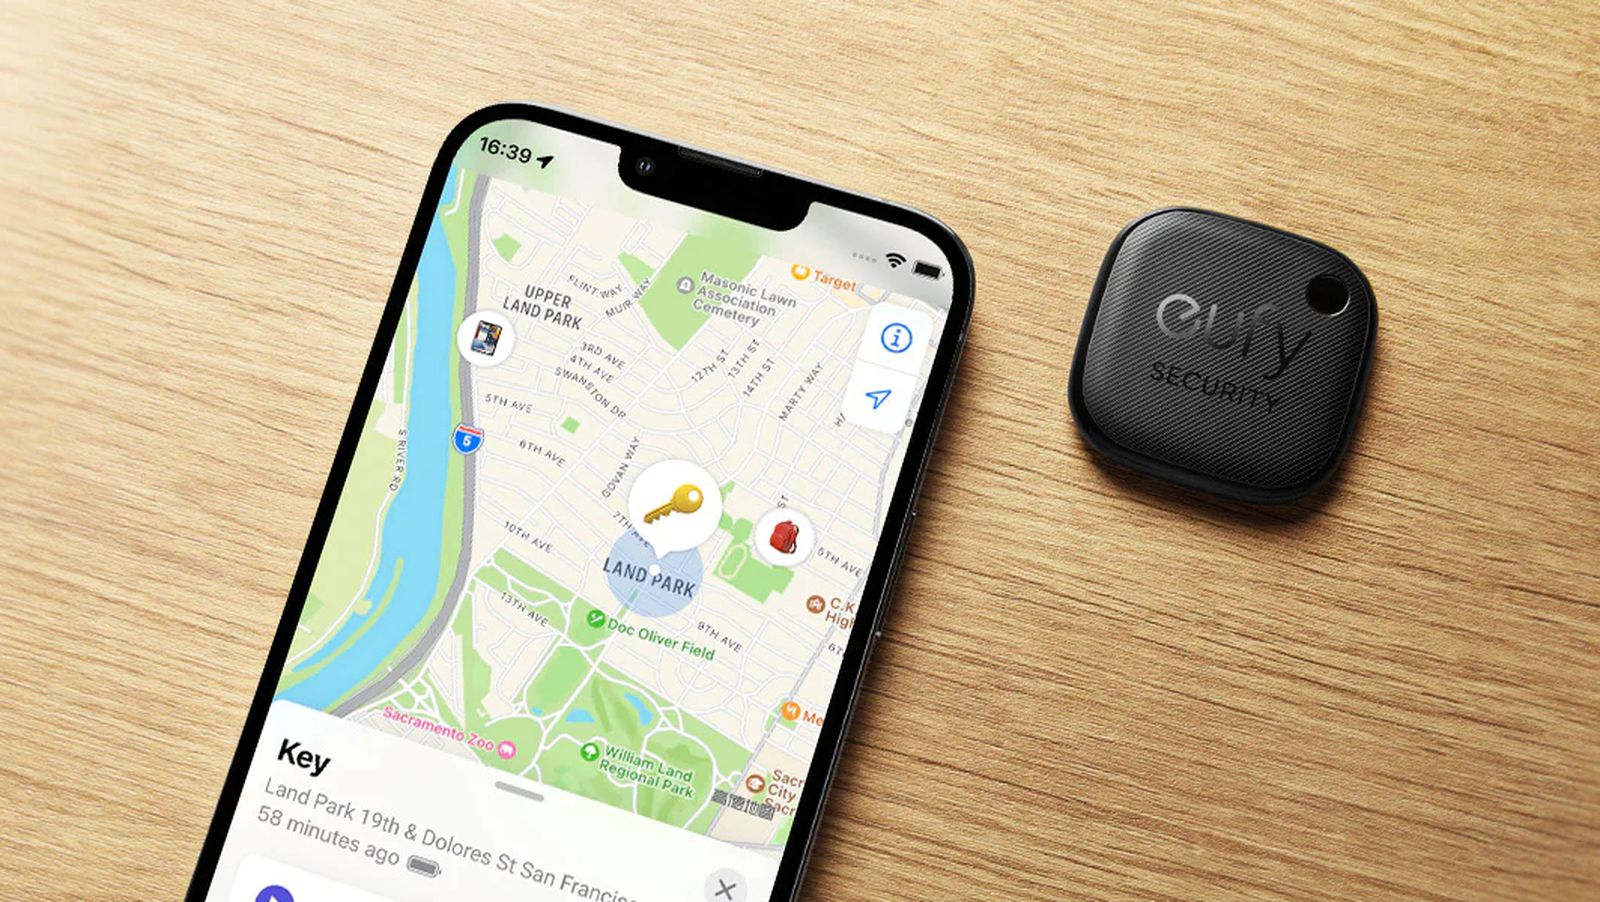 Eufy Launches Cheaper AirTag Alternative With Find My App Support - macrumors.com